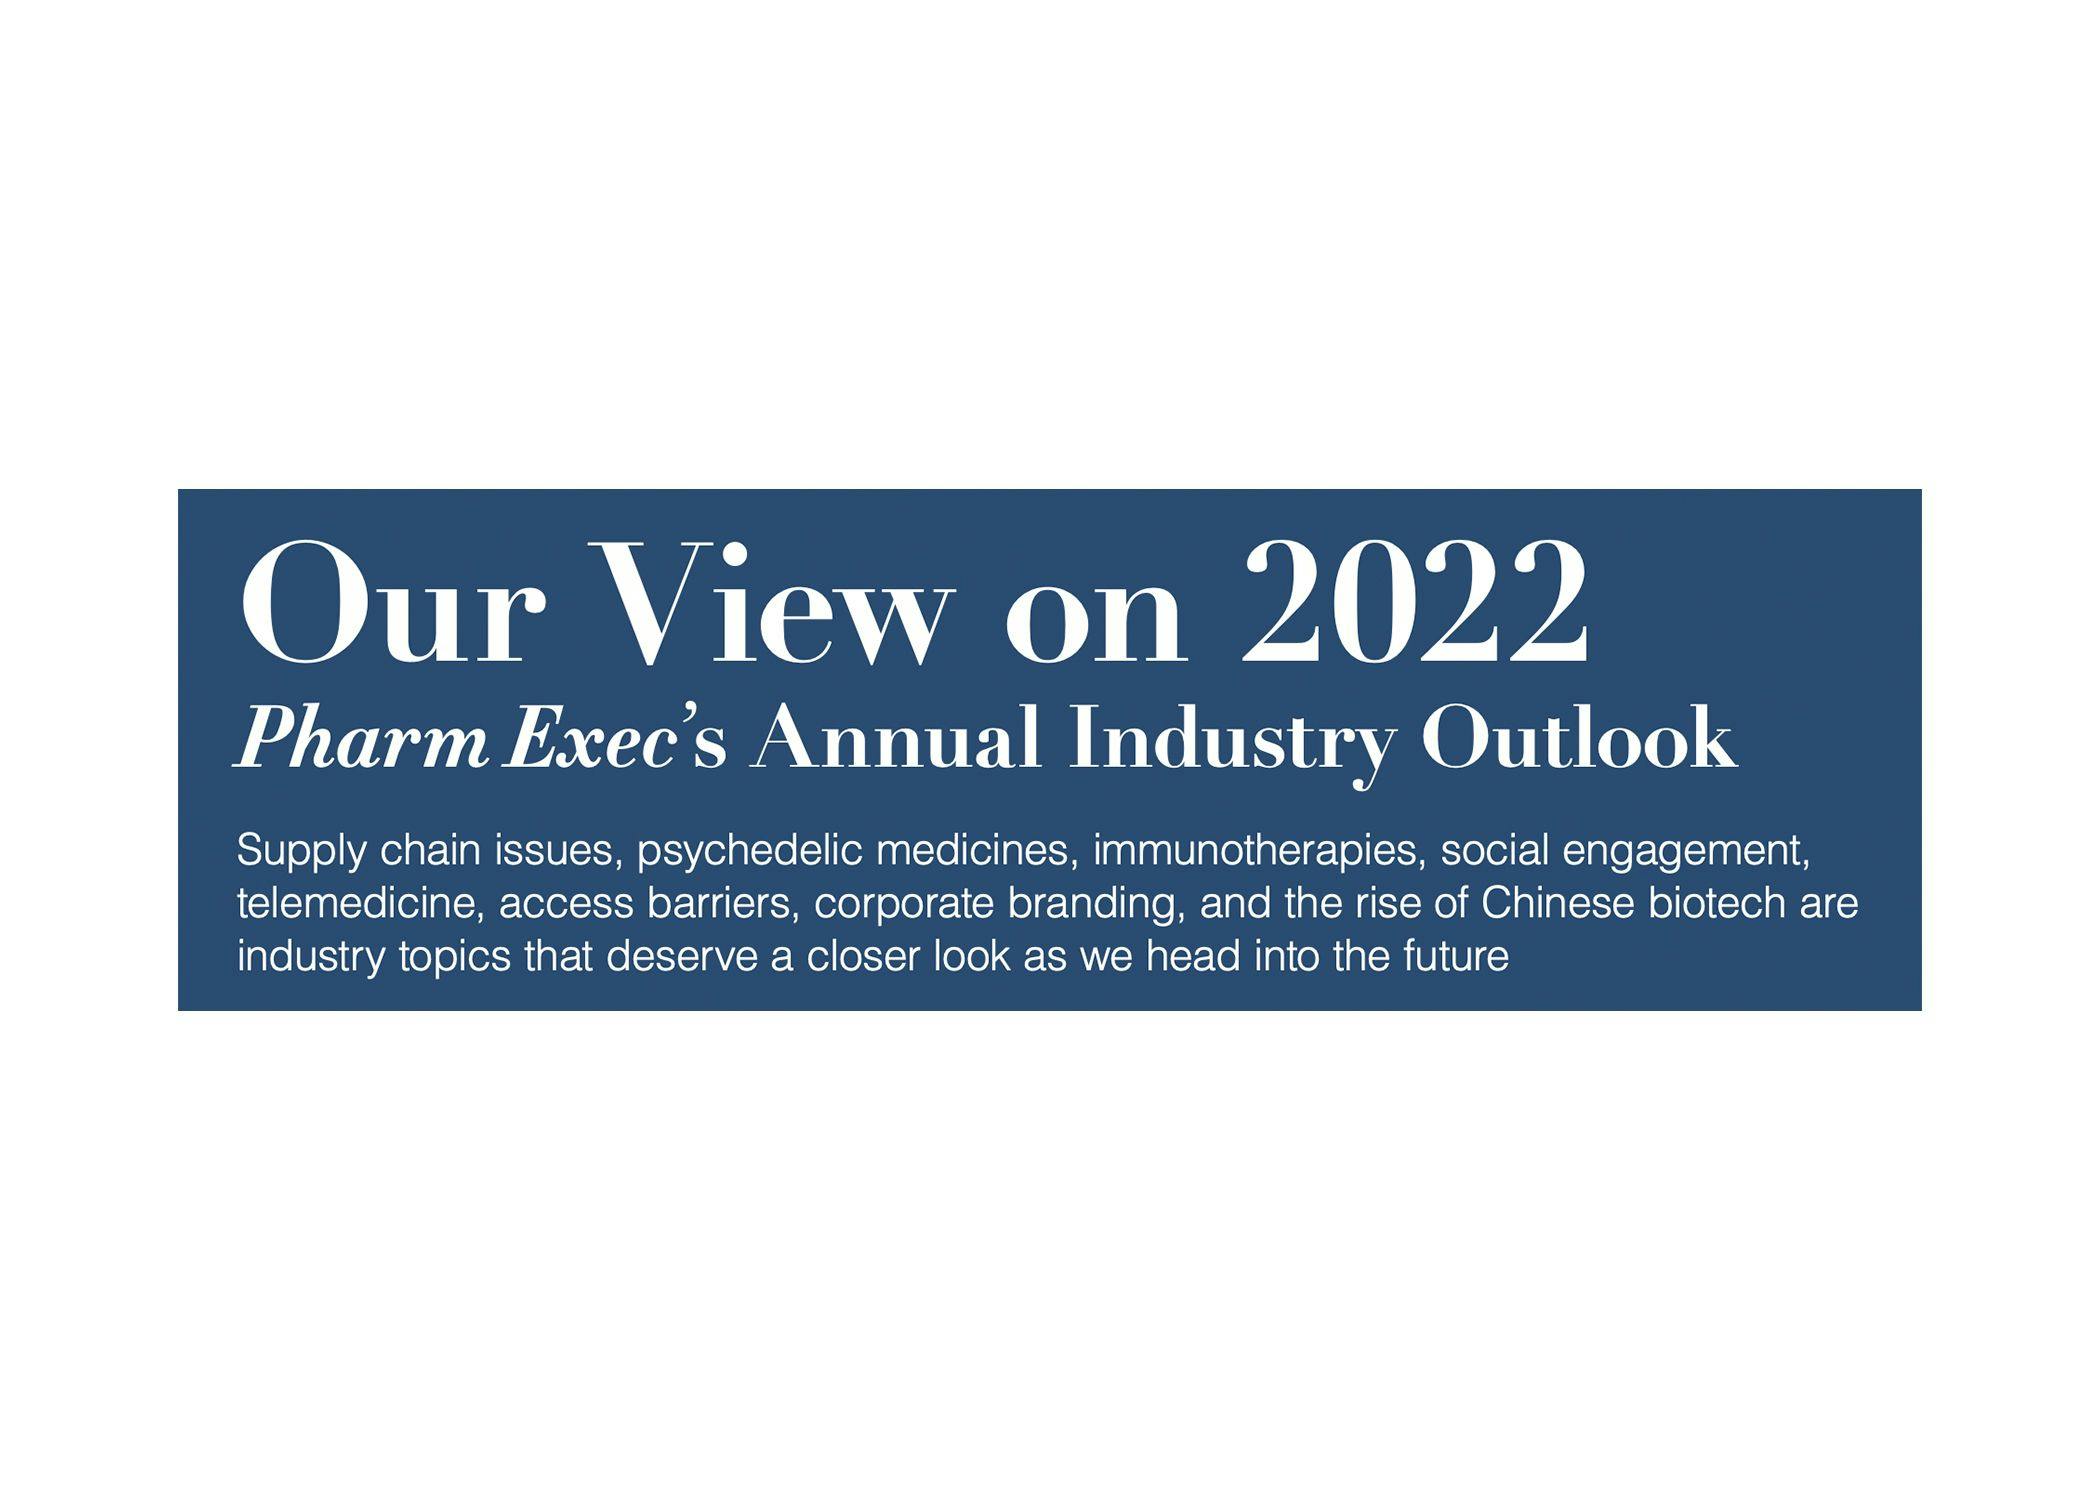 Our View on 2022: Pharm Exec’s Annual Industry Outlook